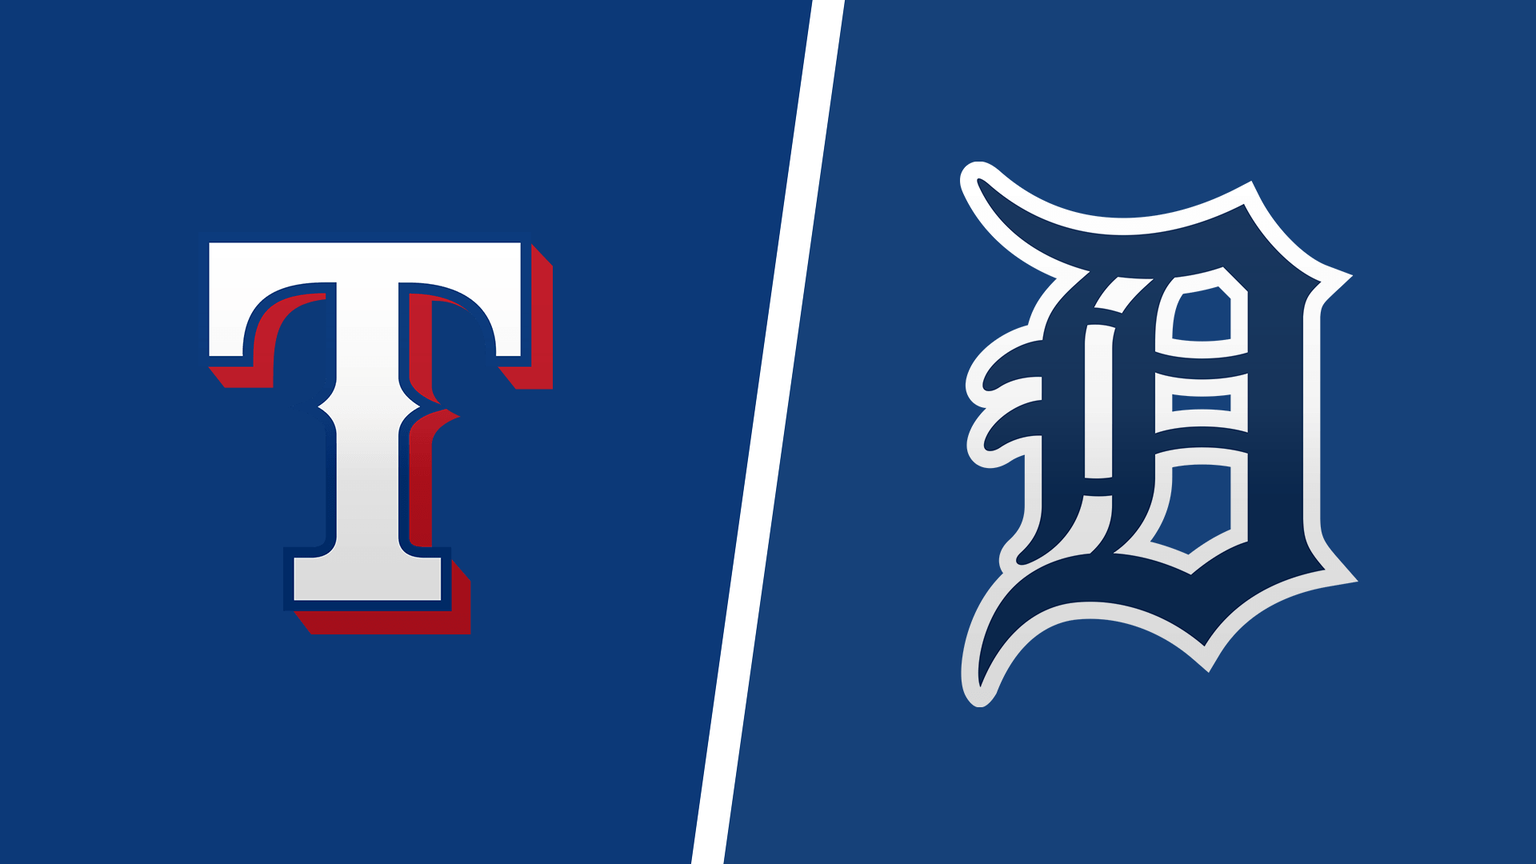 How to Watch Detroit Tigers vs. Texas Rangers Live Online Without Cable